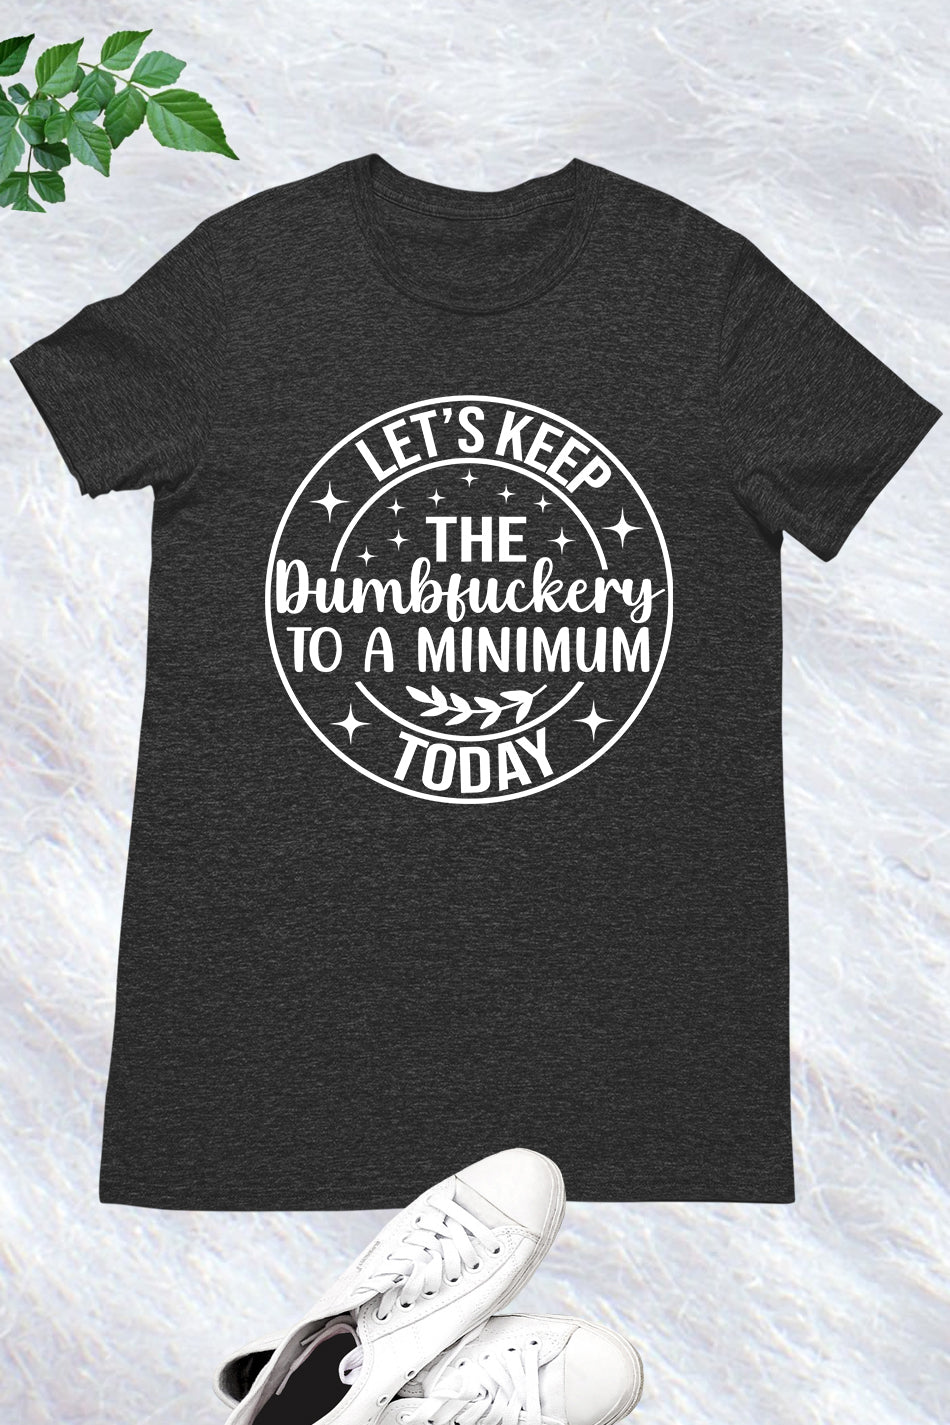 Let's Keep The Dumbfuckery To a Minimum Today Shirts